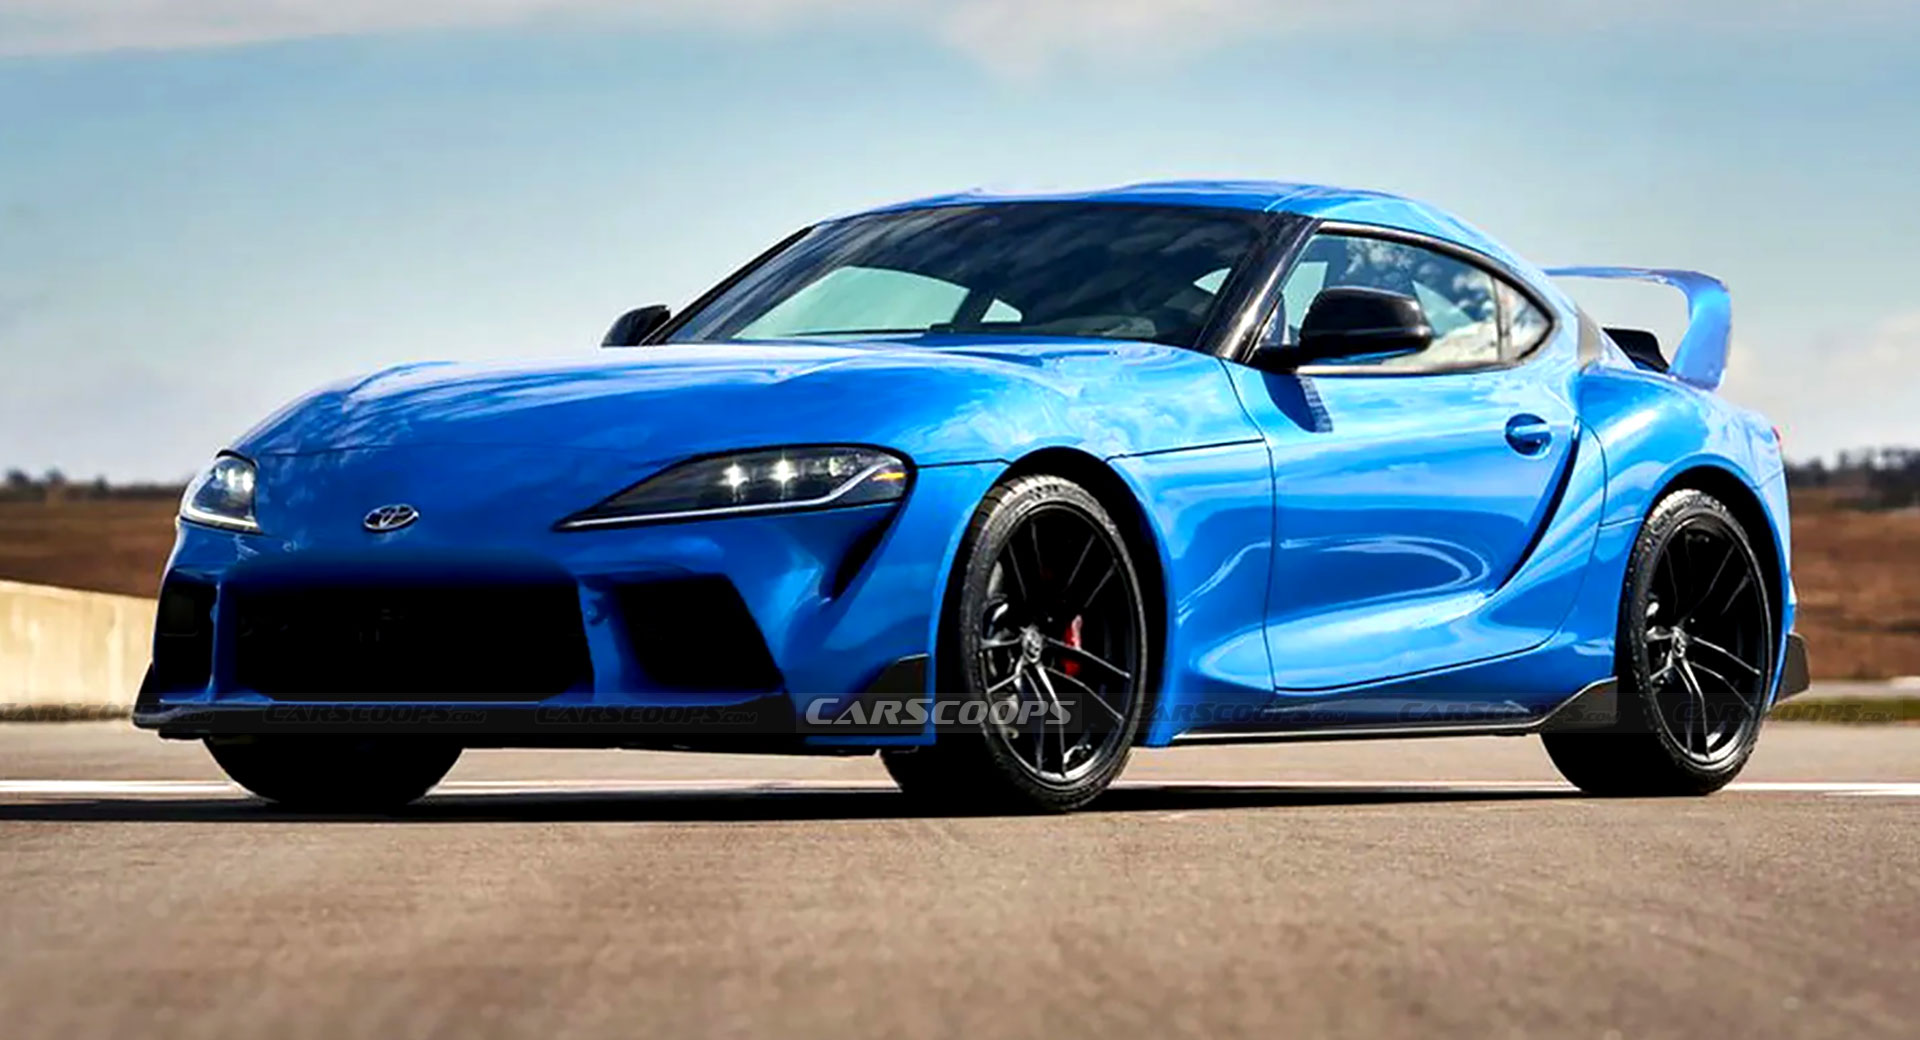 https://www.carscoops.com/wp-content/uploads/2021/06/Toyota-Supra-Redesign-2-Carscoops.jpg